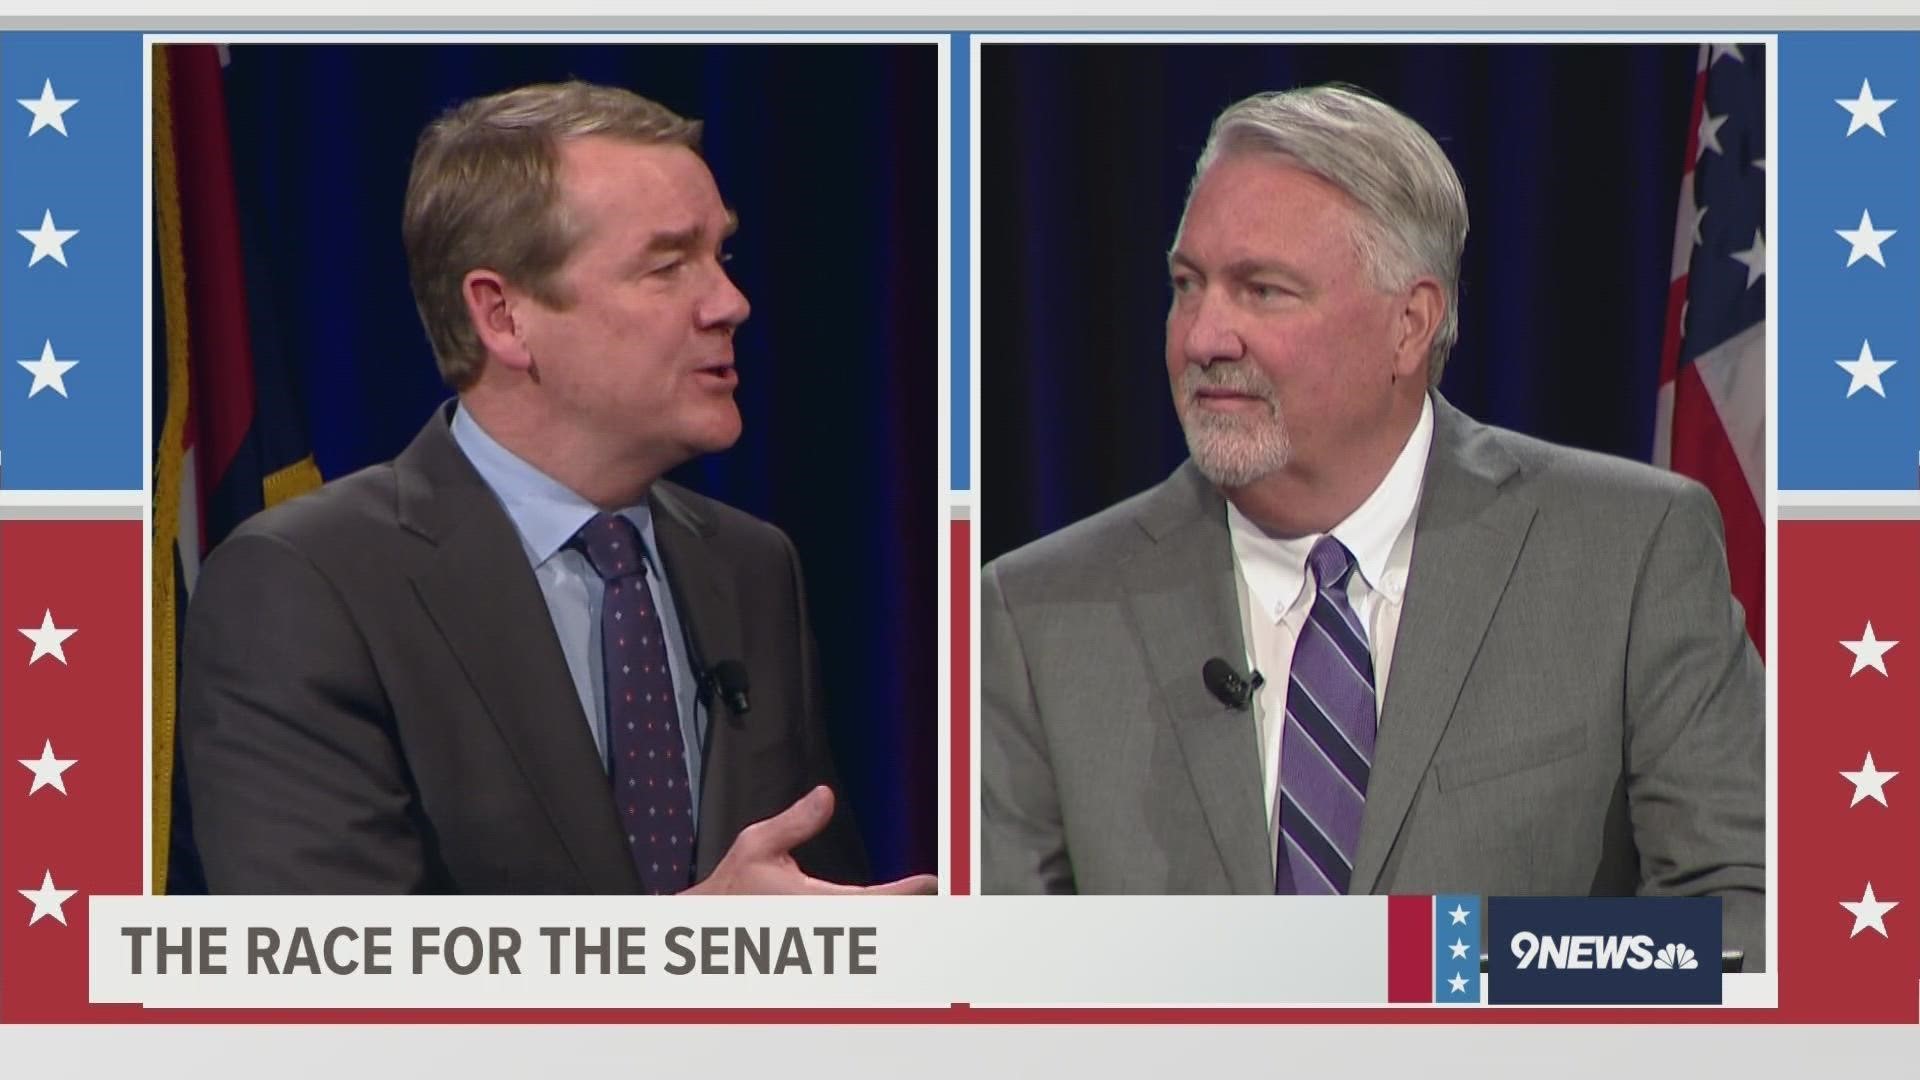 Incumbent Democratic Sen. Michael Bennet faces a challenge from Republican challenger and business owner Joe O'Dea for one of Colorado's Senate seats.